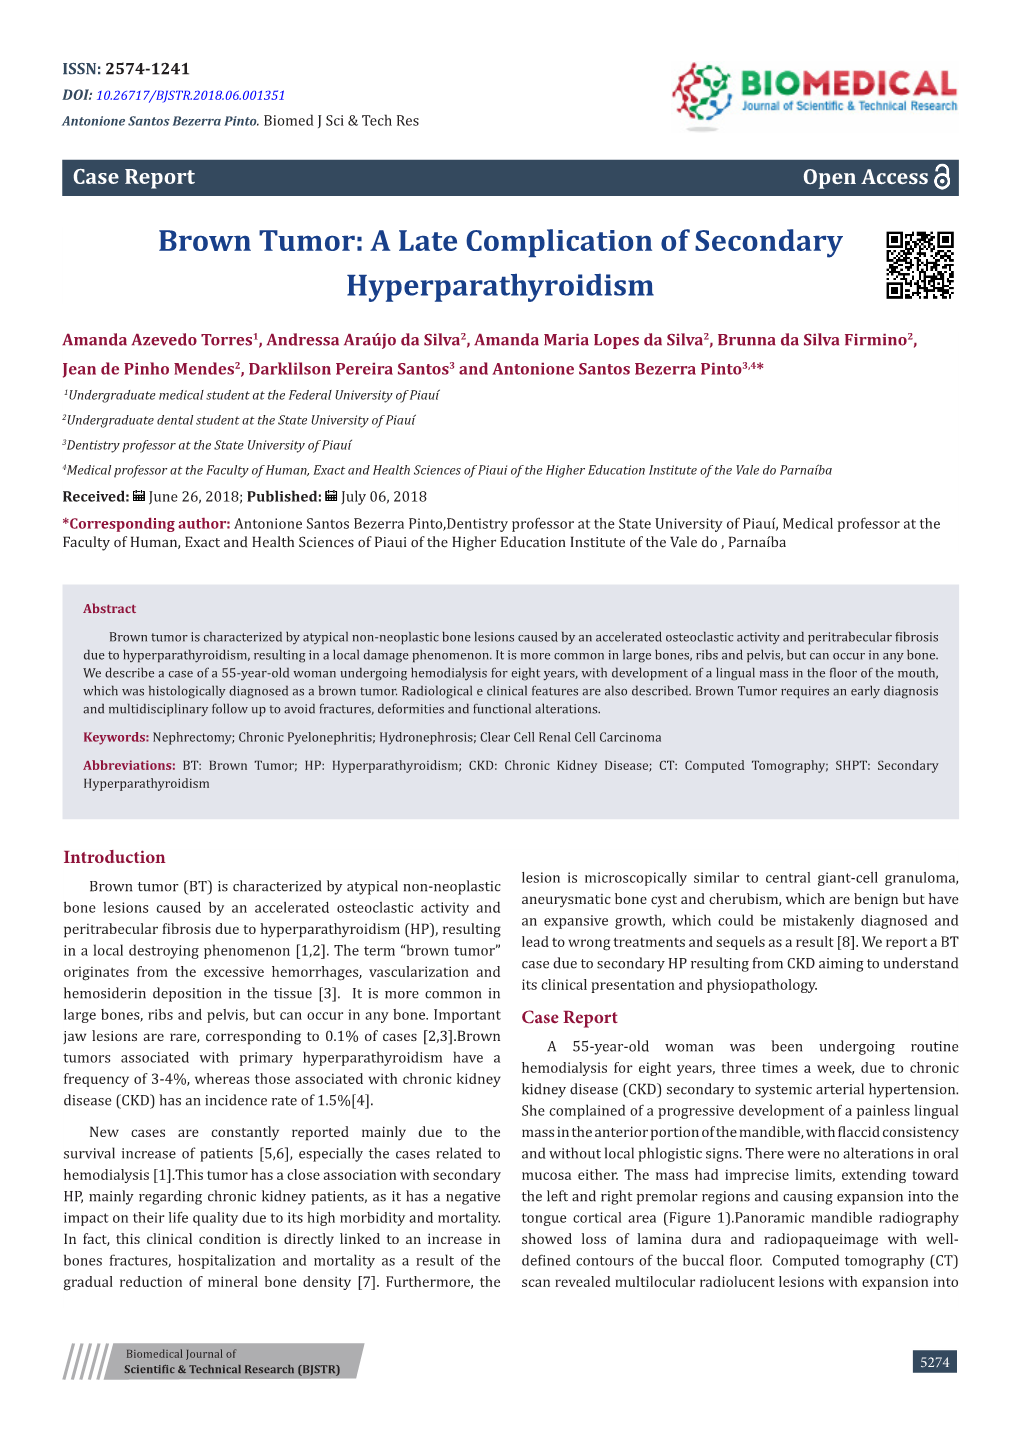 Brown Tumor: a Late Complication of Secondary Hyperparathyroidism